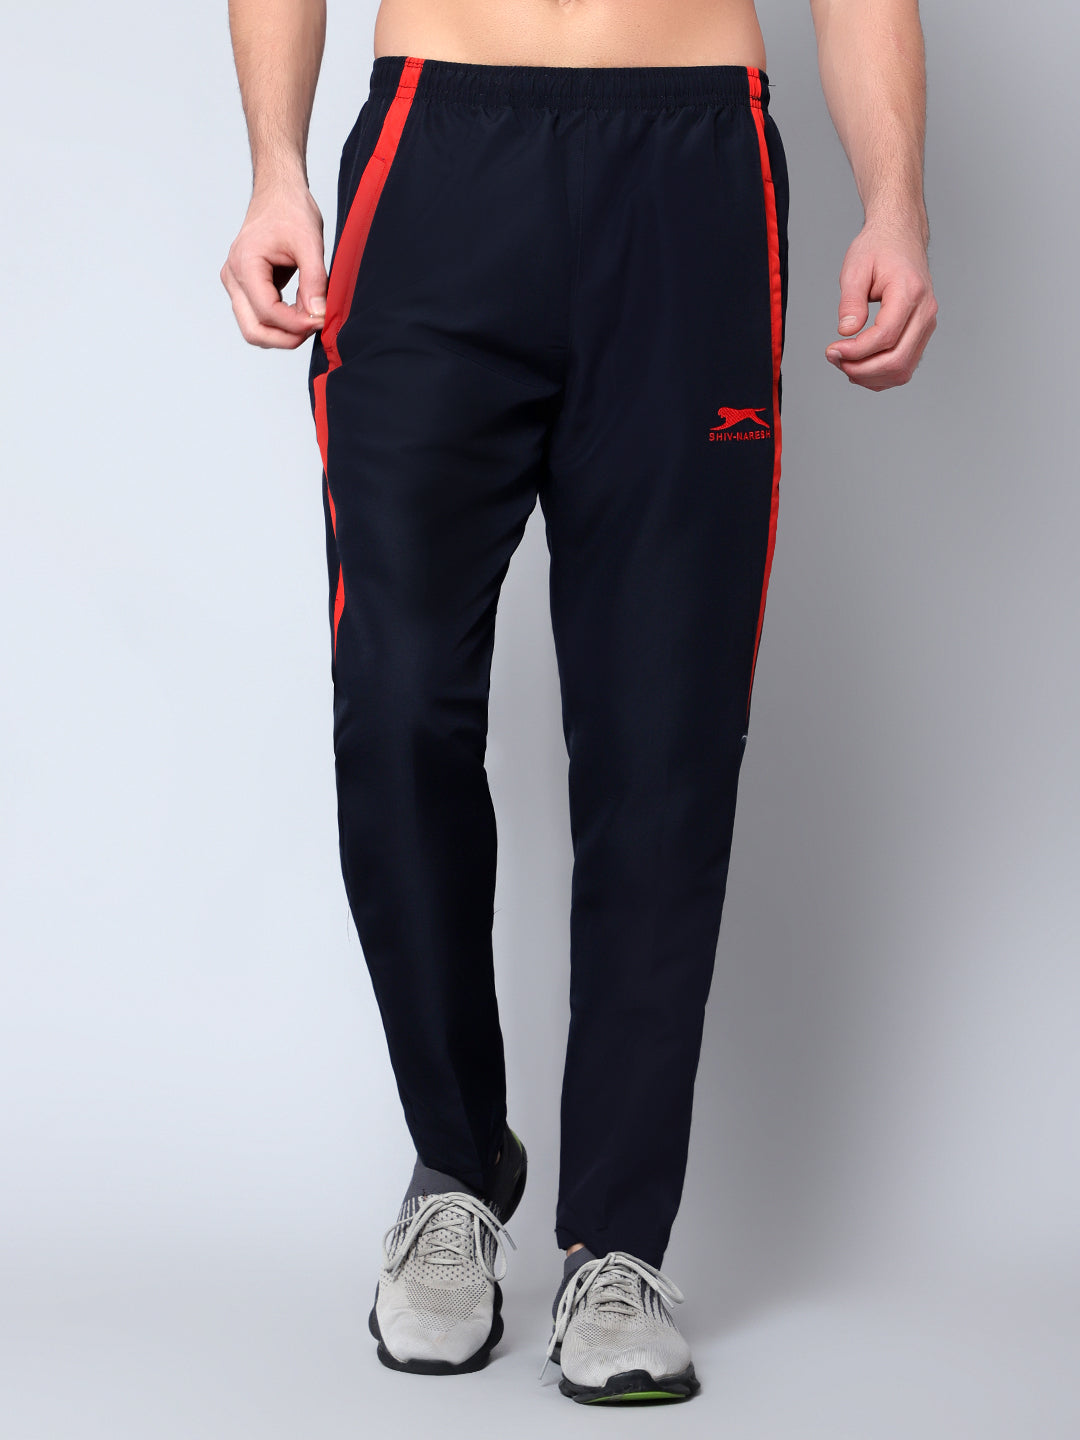 Buy Off White Track Pants for Men by PERFORMAX Online  Ajiocom